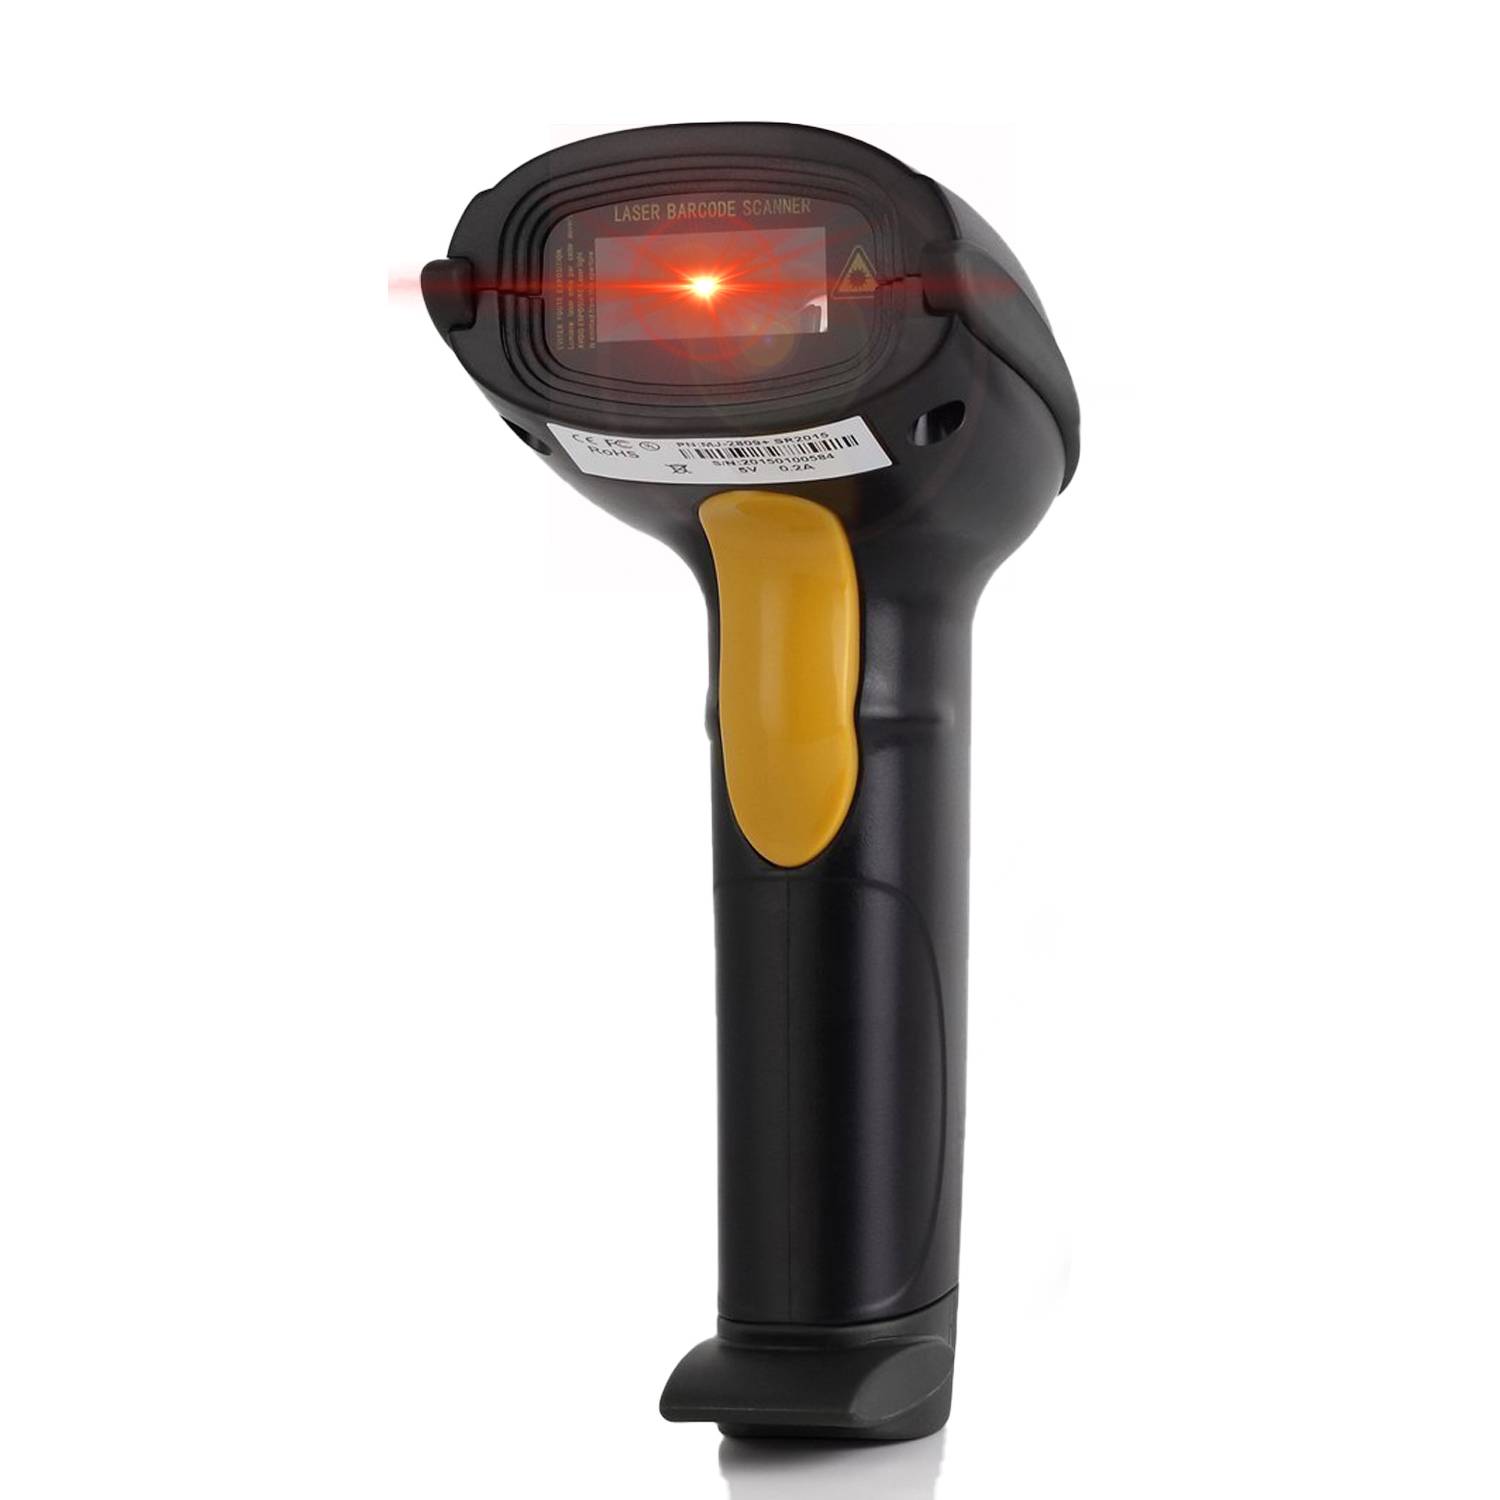 MINJCODE 1D 2.4G wireless WIFI barcode scanner for logistics MJ2830 Featured Image